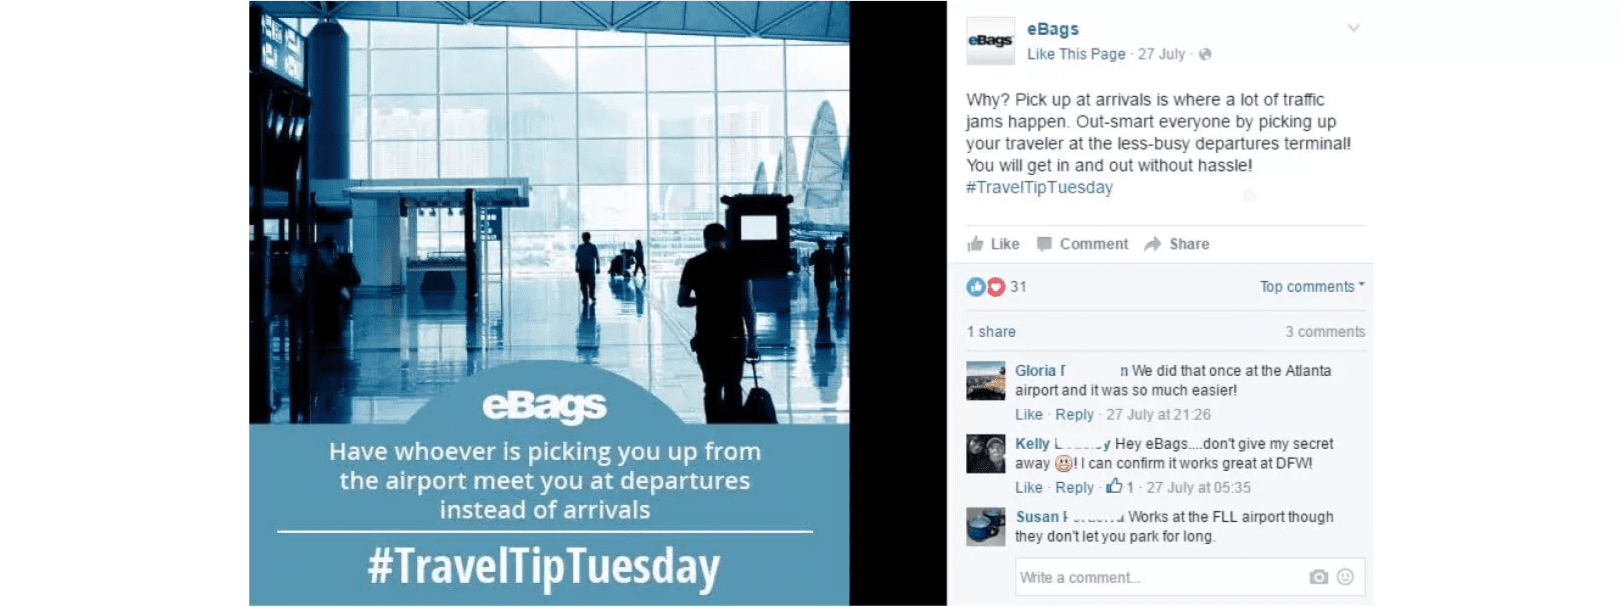 eBags' Facebook post for #TravelTipTuesday suggesting travelers to meet at departures instead of arrivals for convenience, reflecting their commitment to providing practical travel advice.